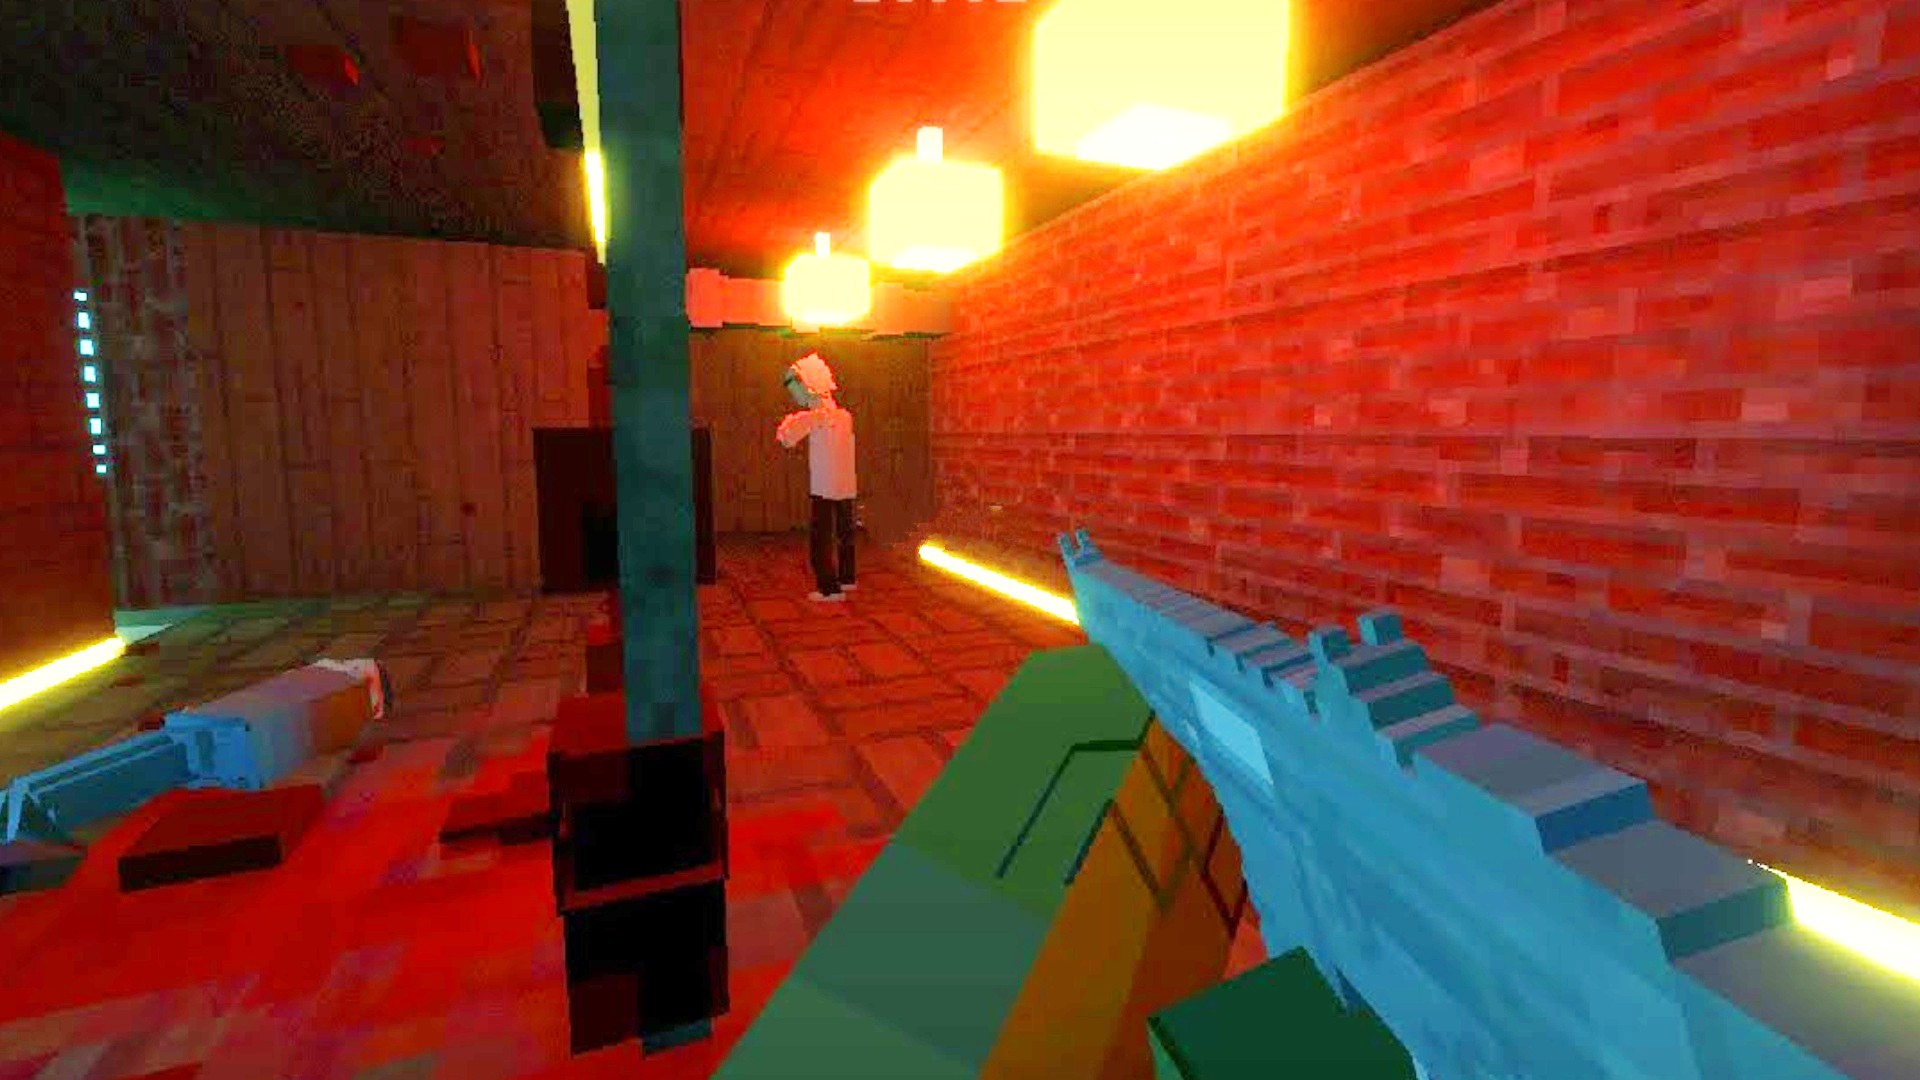 Hotline Miami reimagined as a destructive new FPS you can try now